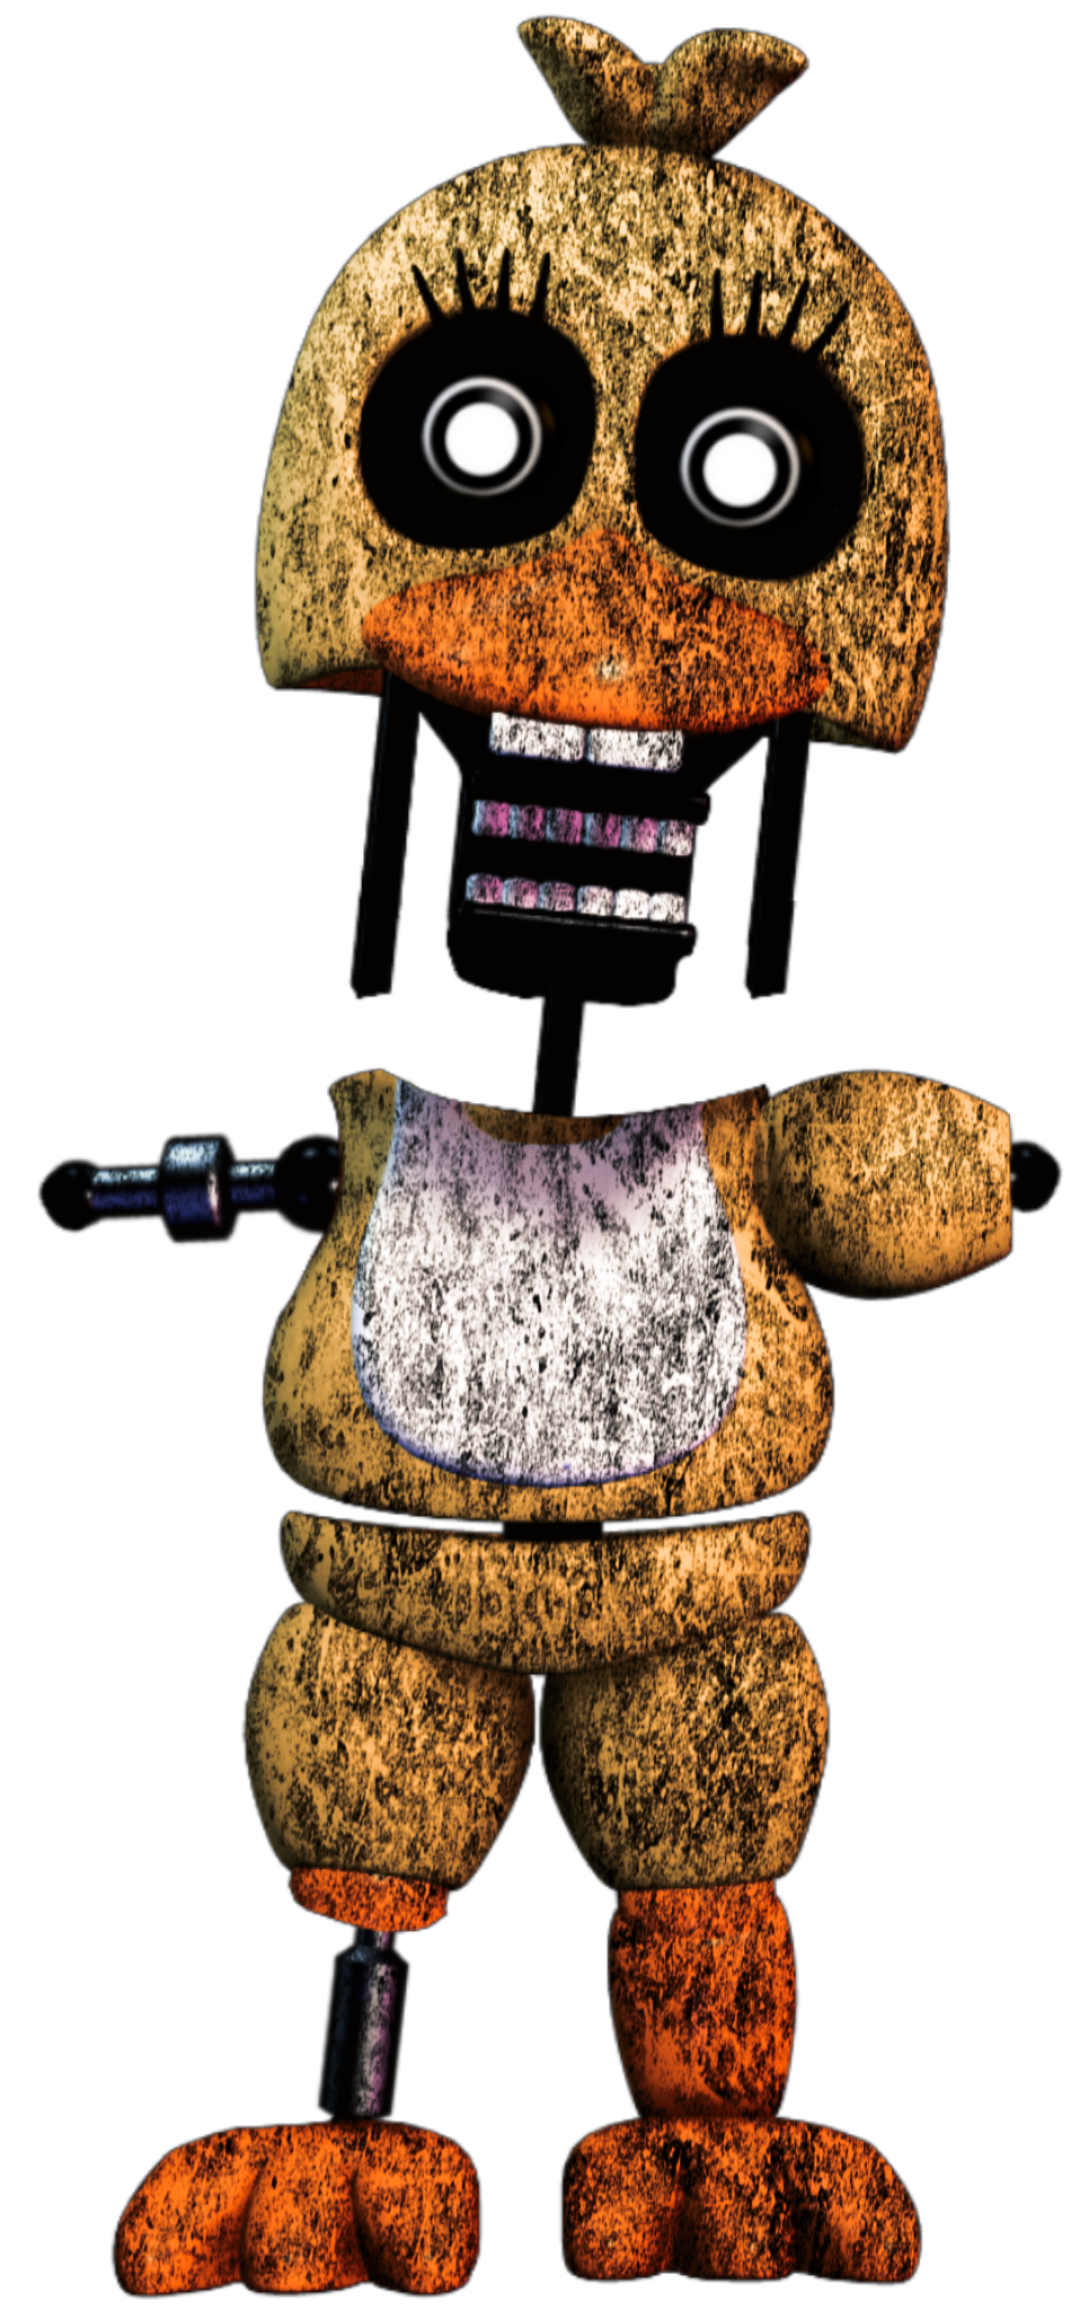 Ignited Chica's new design for the Ignited Collection has been